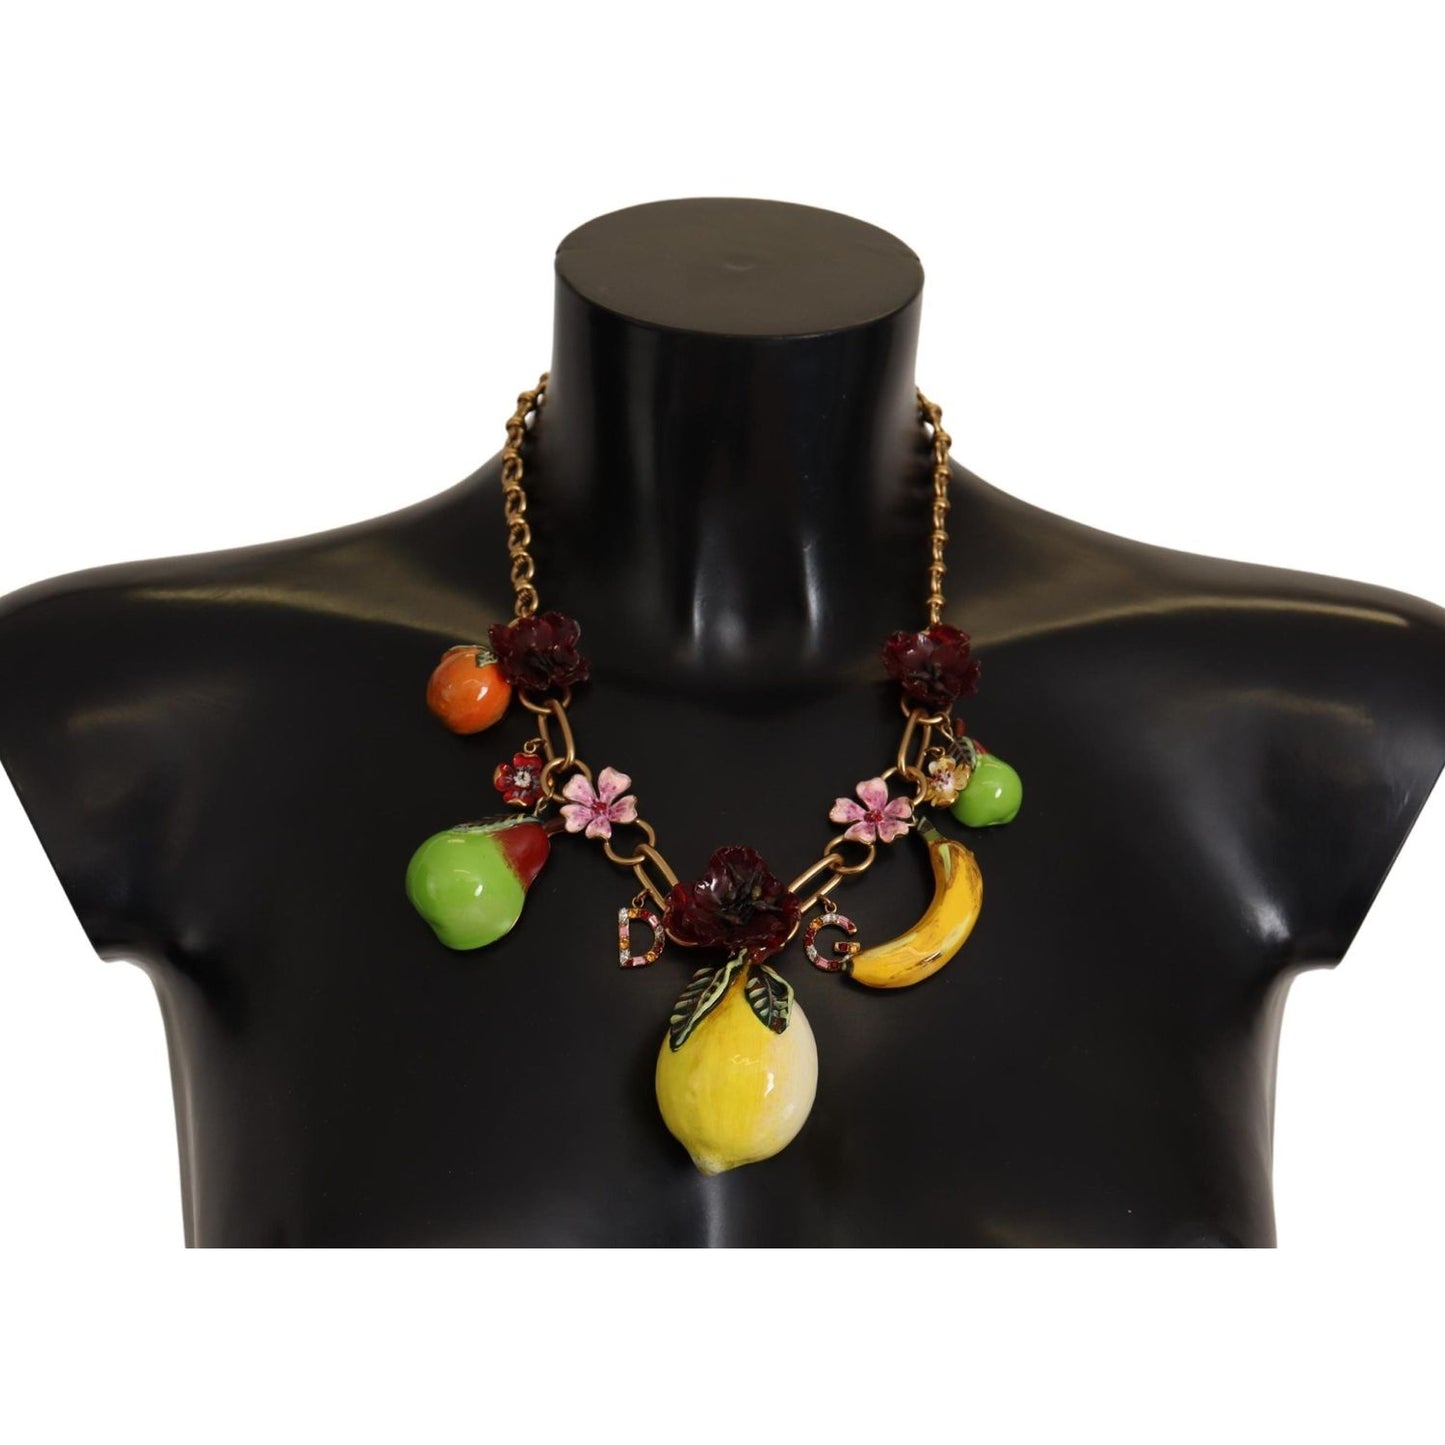 Dolce & Gabbana Chic Gold Statement Sicily Fruit Necklace WOMAN NECKLACE gold-brass-sicily-fruits-roses-statement-necklace IMG_1909-scaled-f68f89f6-279.jpg